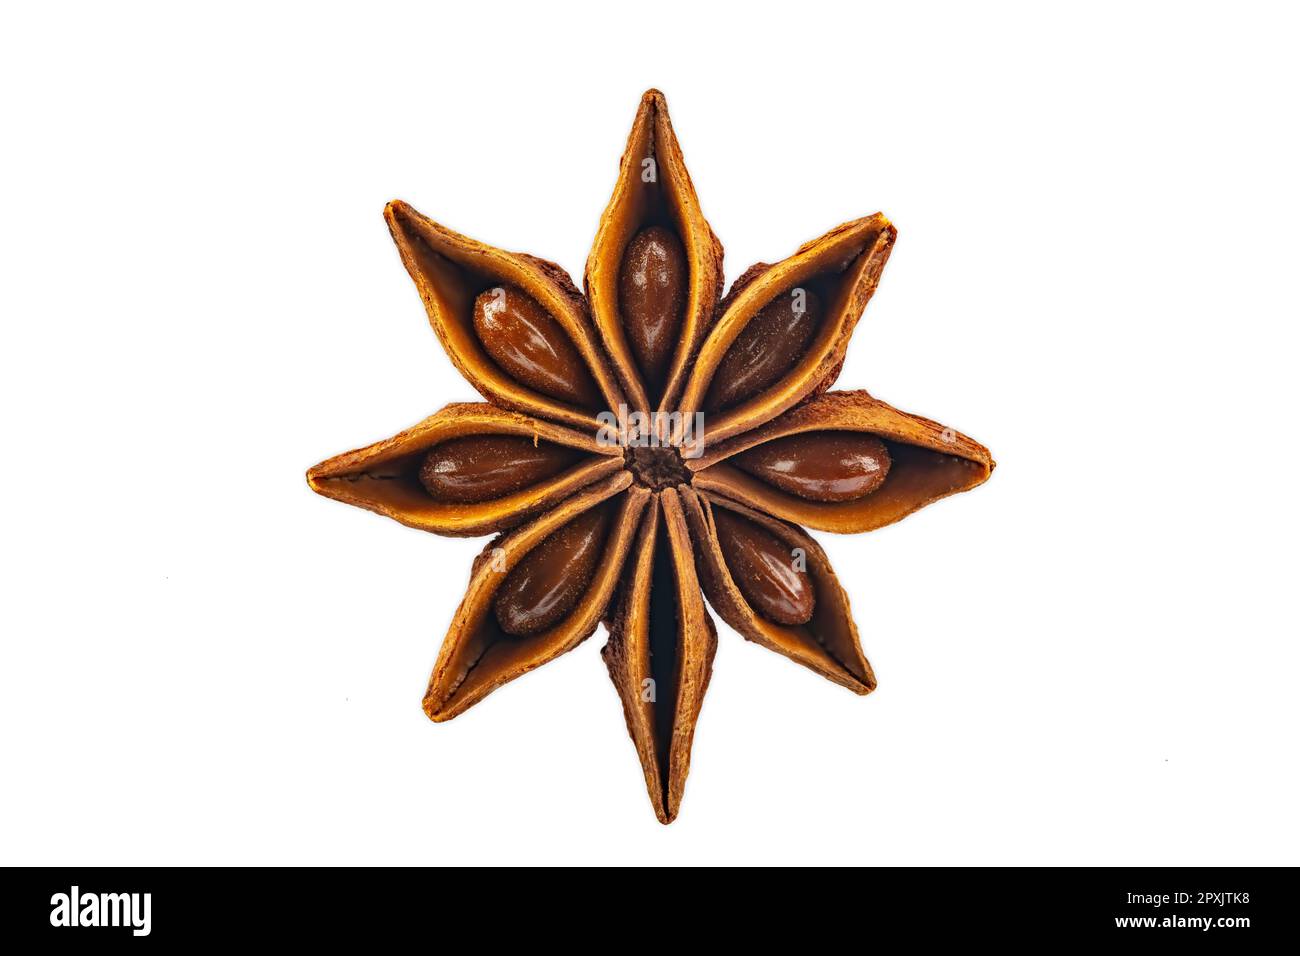 Macro shot from one Anise ingredient in detail isolated over white background. Stock Photo